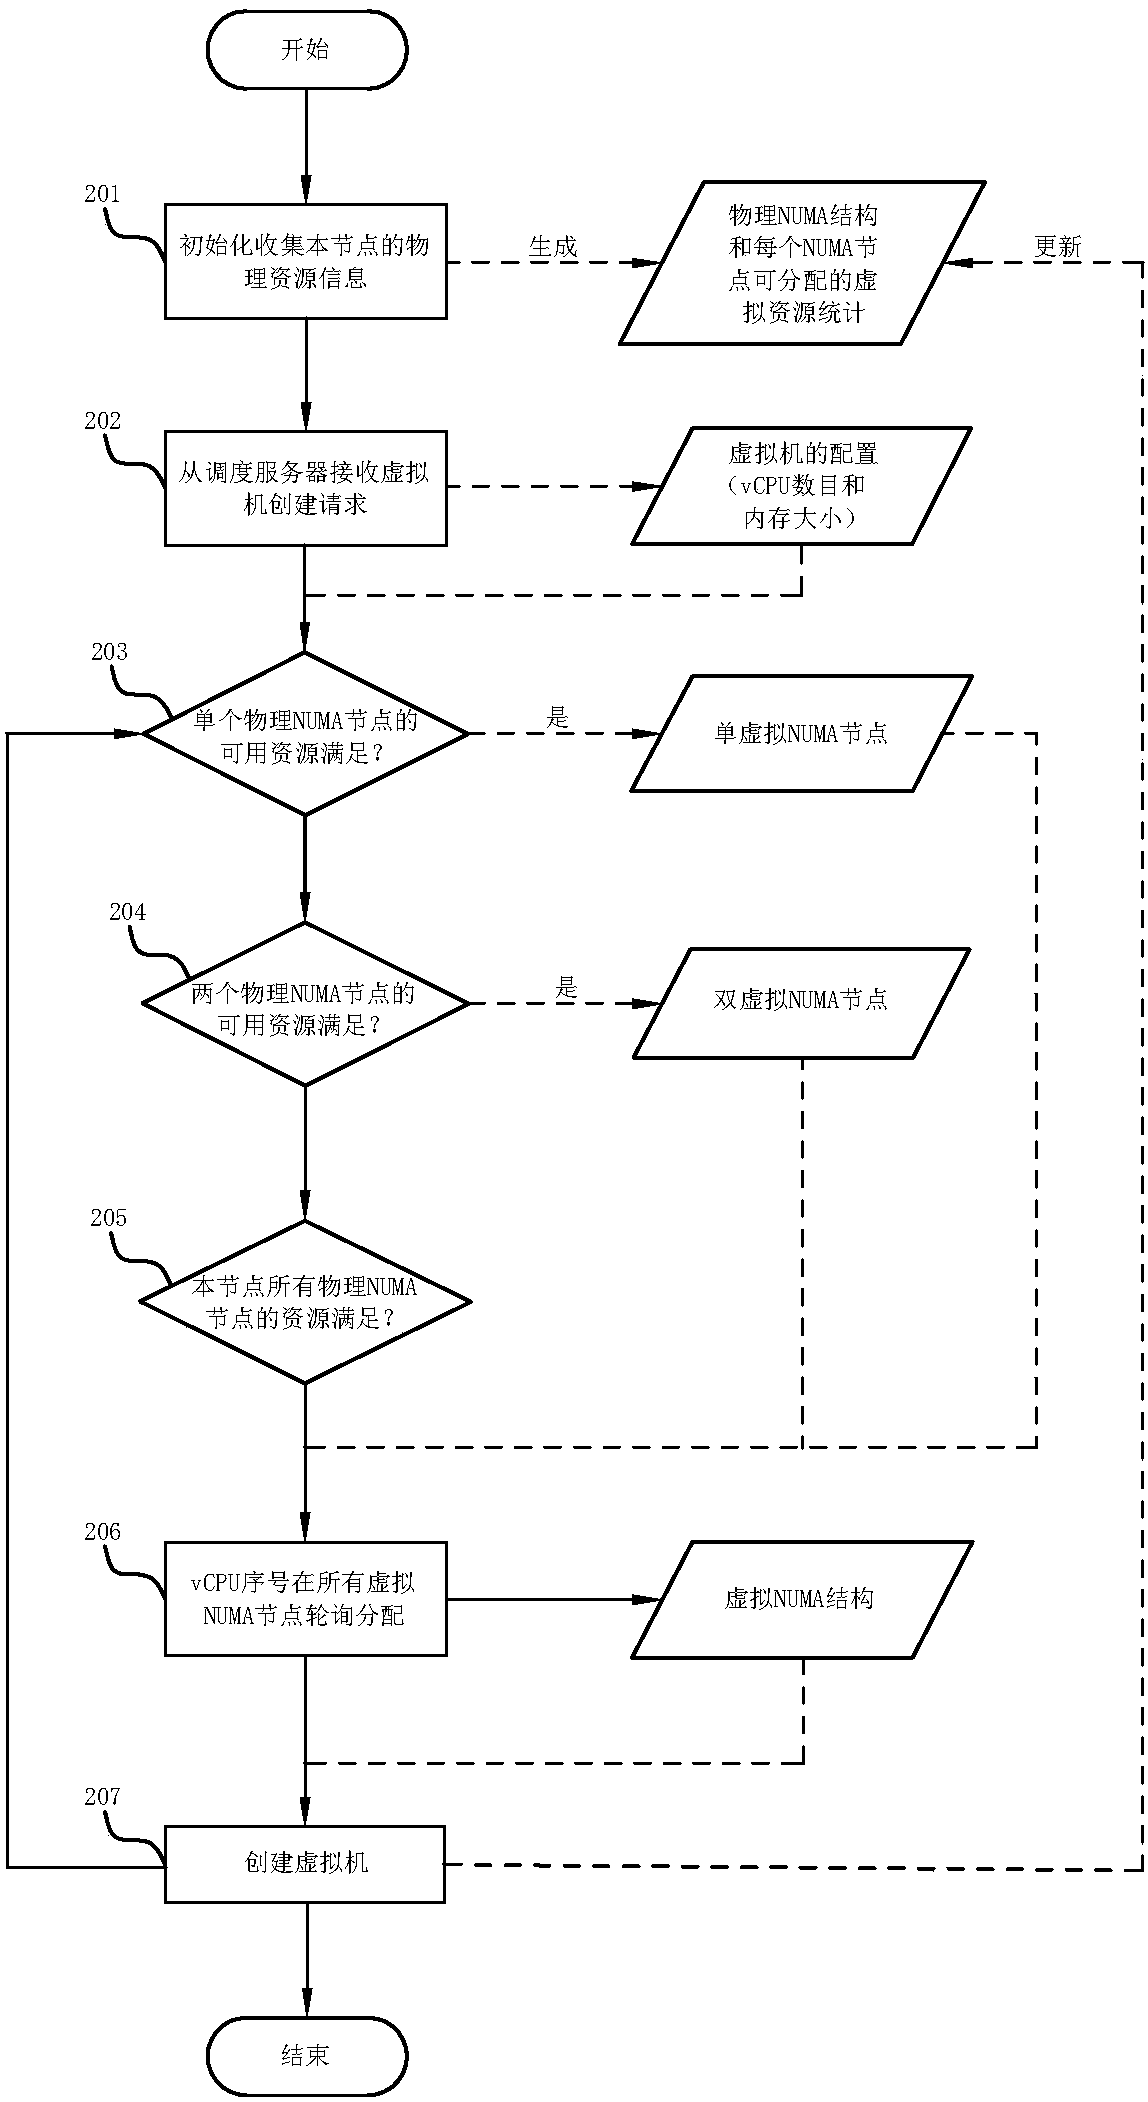 Resource scheduling allocation method, computer system and super-fusion architecture system